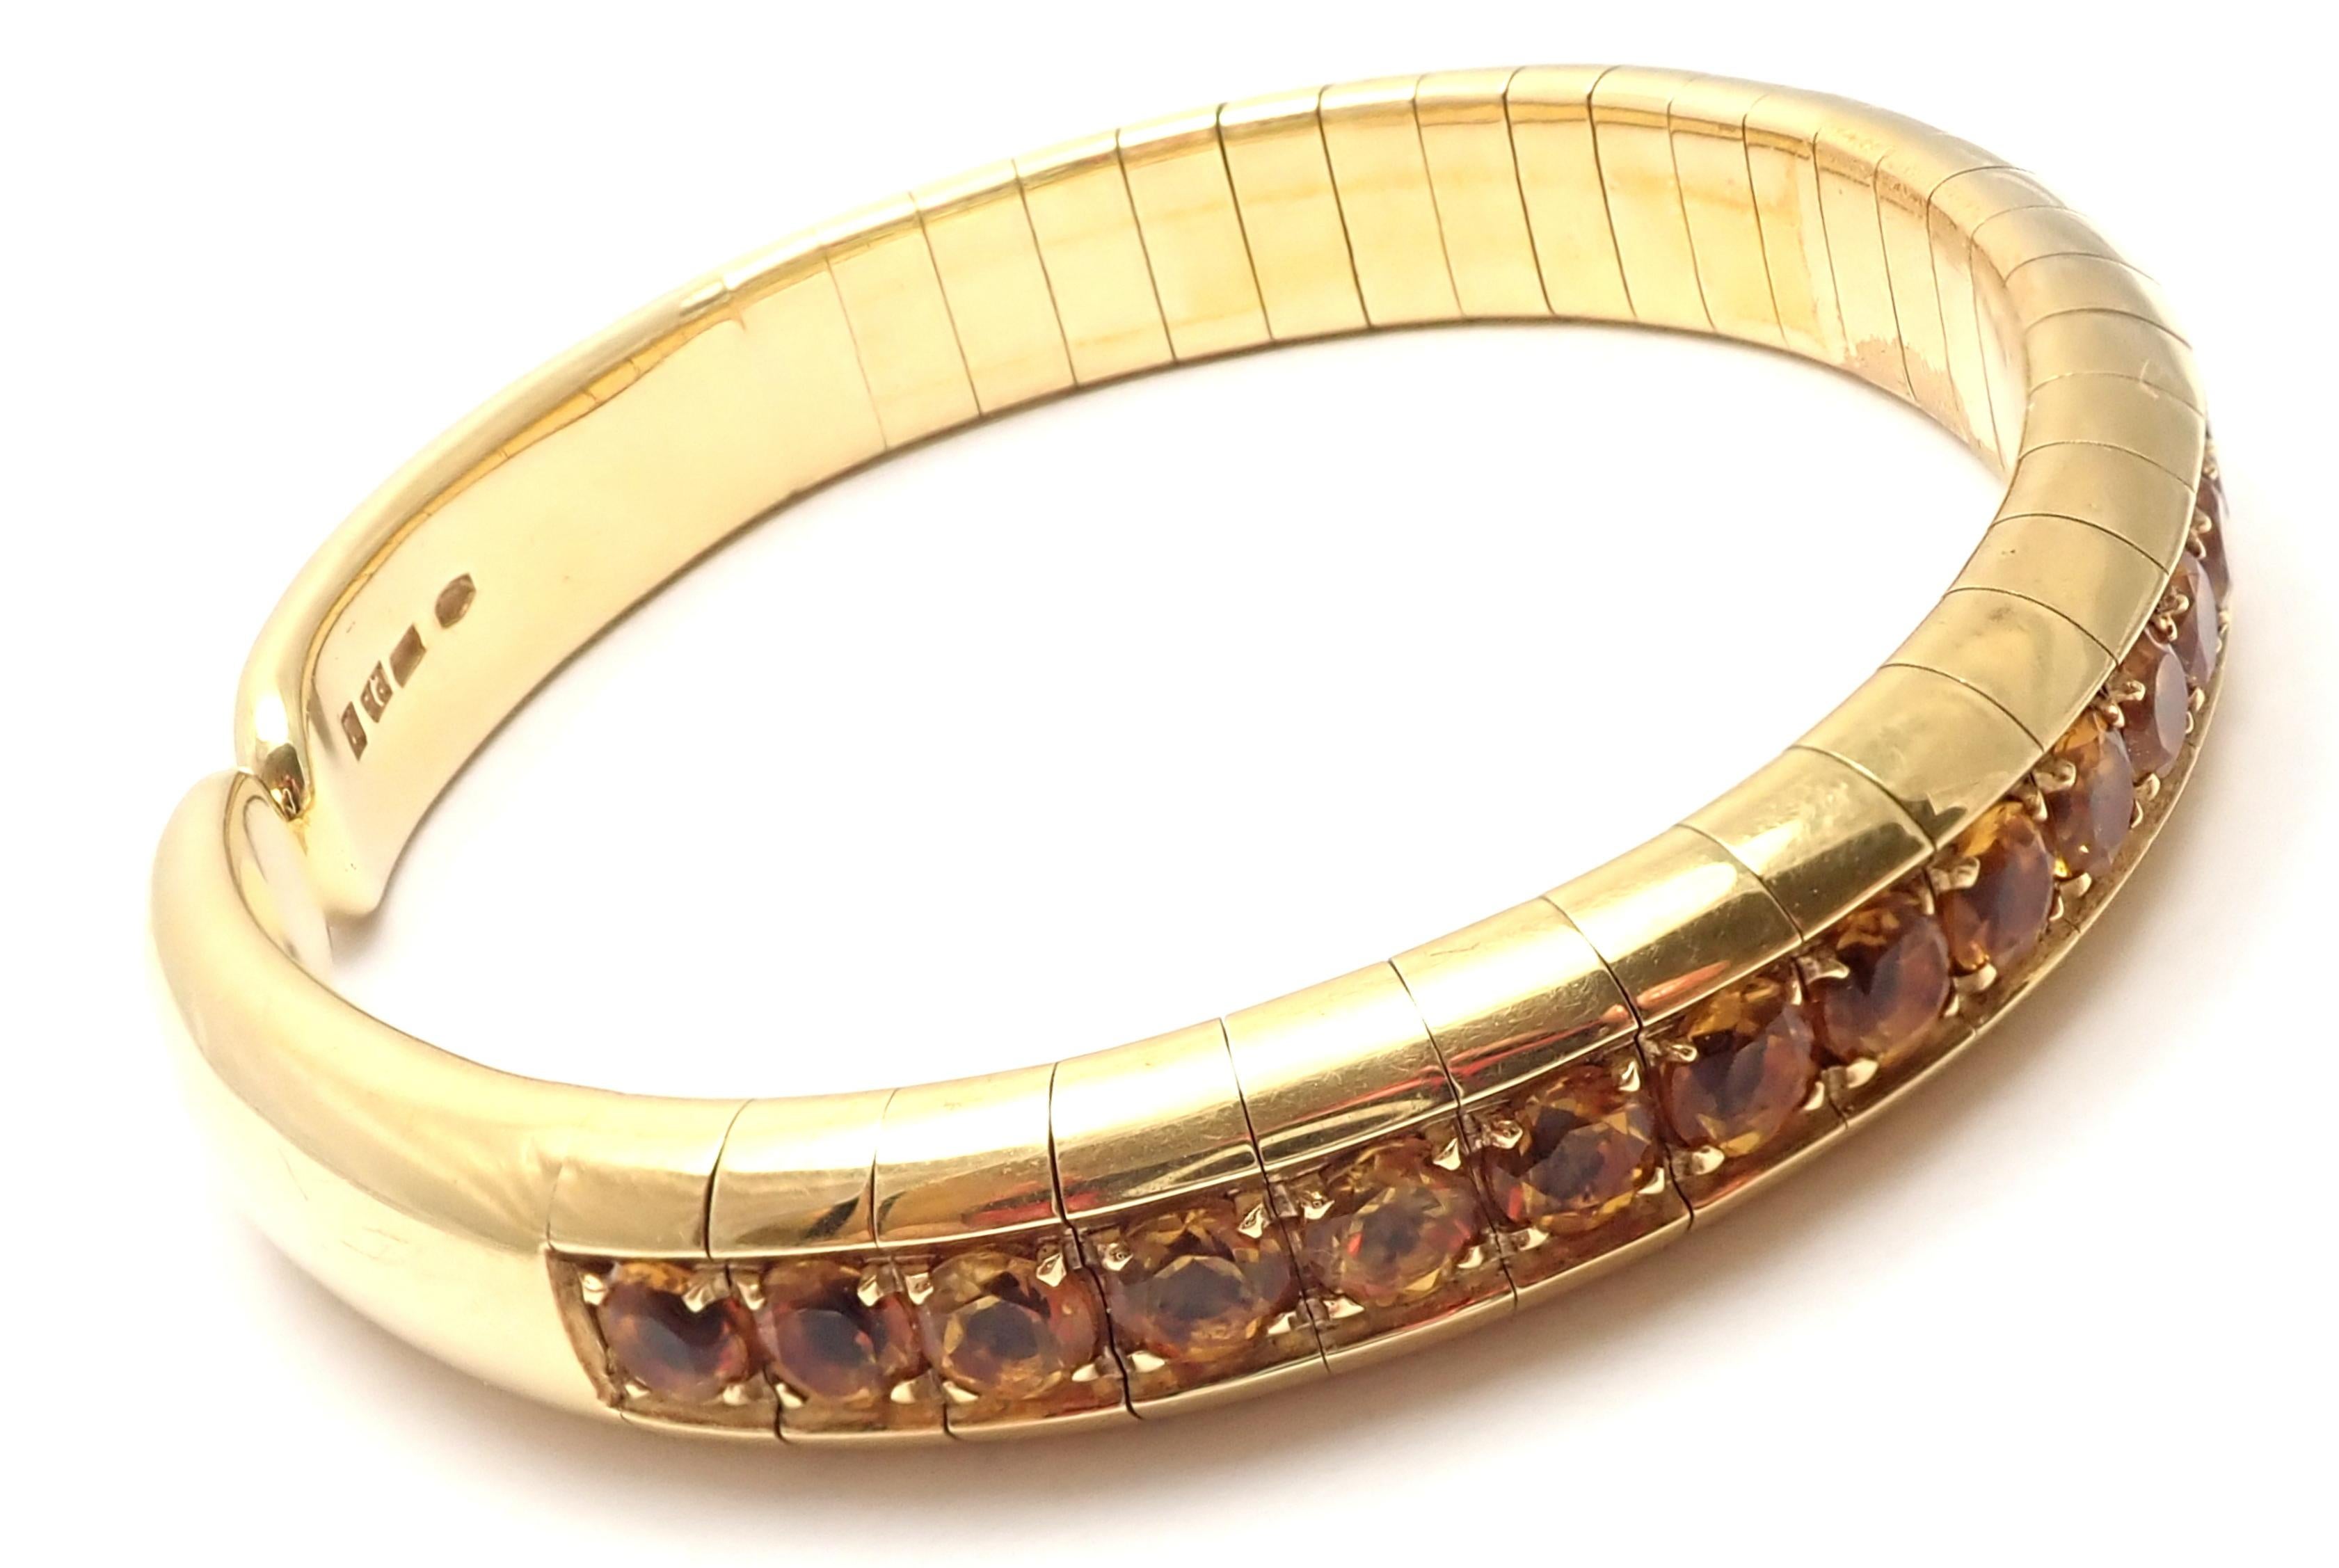 18k Yellow Gold Citrine Bangle Bracelet by Pasquale Bruni. 
With 31 round citrine stones.
This bracelet comes with Box, Certificate.  
Details: 
Length: 7